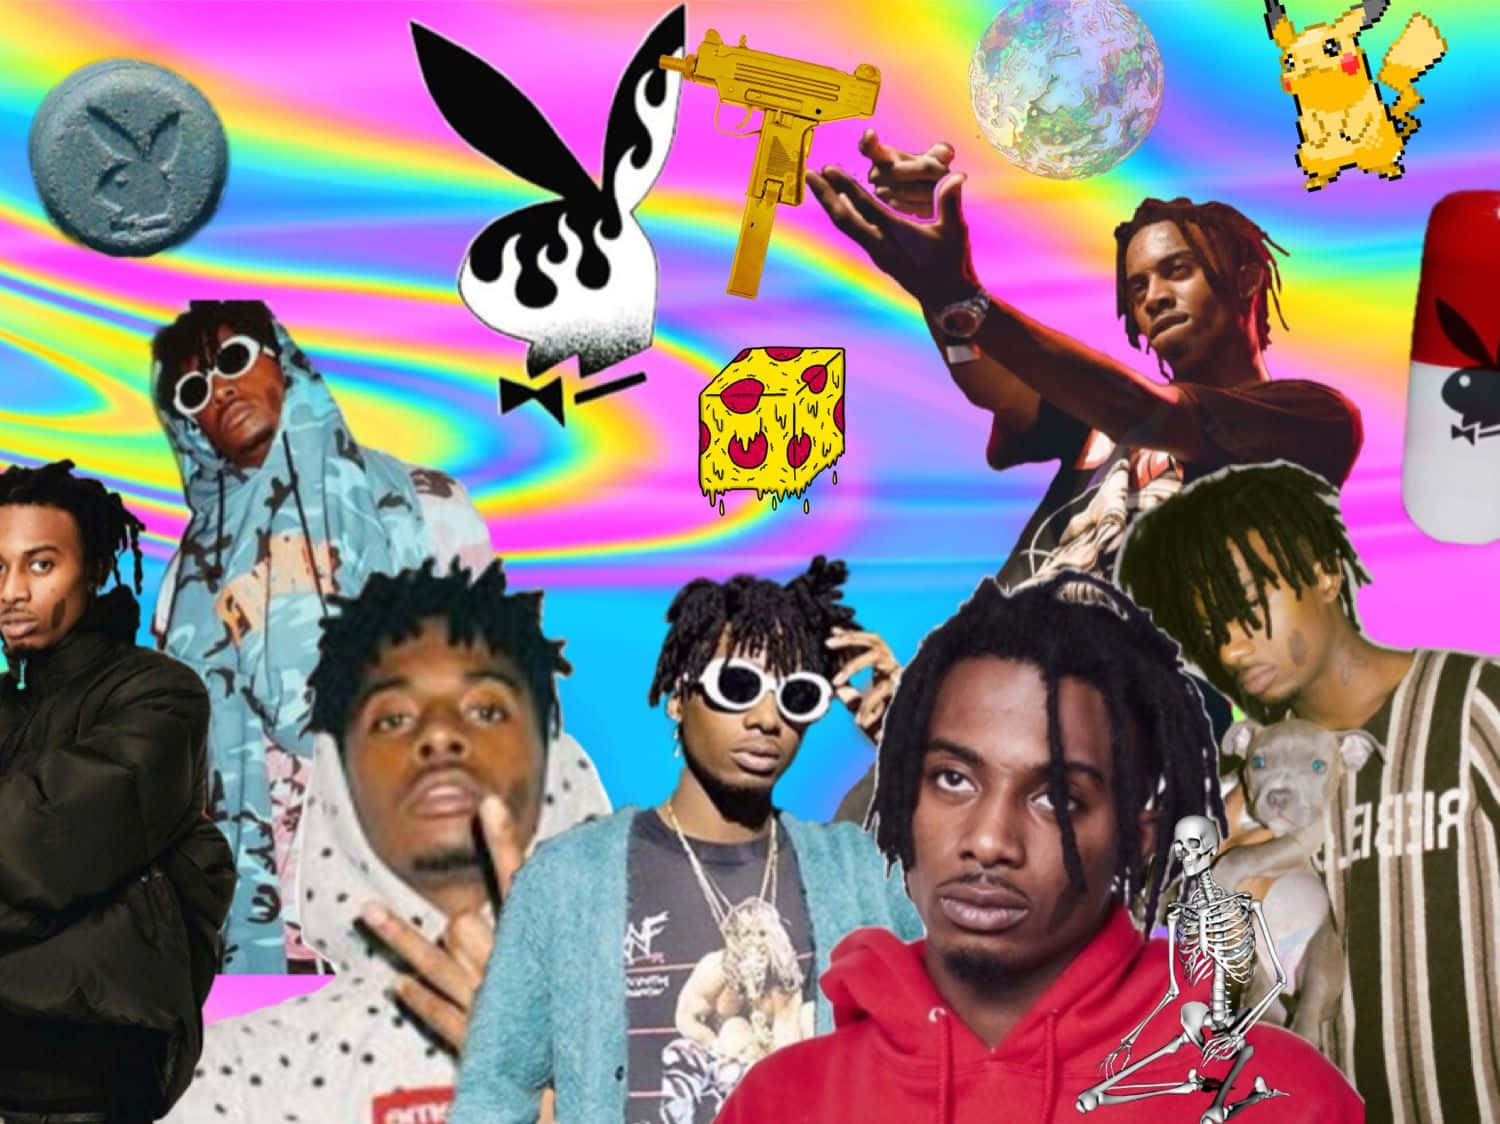 Nyd Playboi Carti PC i hele dens herlighed. Wallpaper